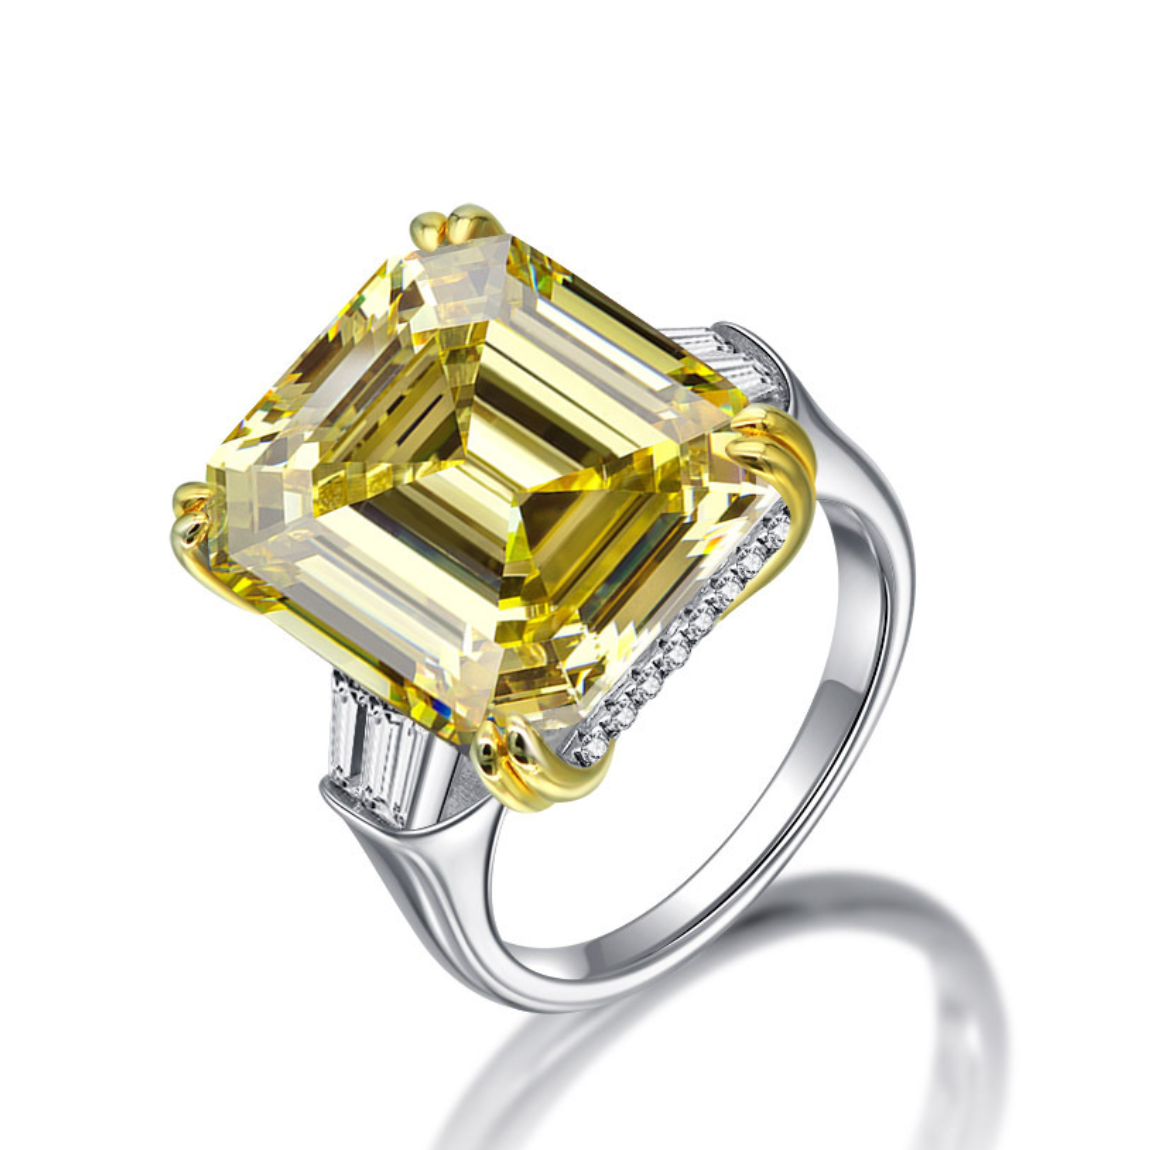 Our exceptional 9.52 Carat Fancy Yellow Asscher Cut Engagement Ring with tapered baguettes and a hidden halo of micro pave under the centre stone makes the perfect promise ring or proposal ring for her by Margalit Rings 